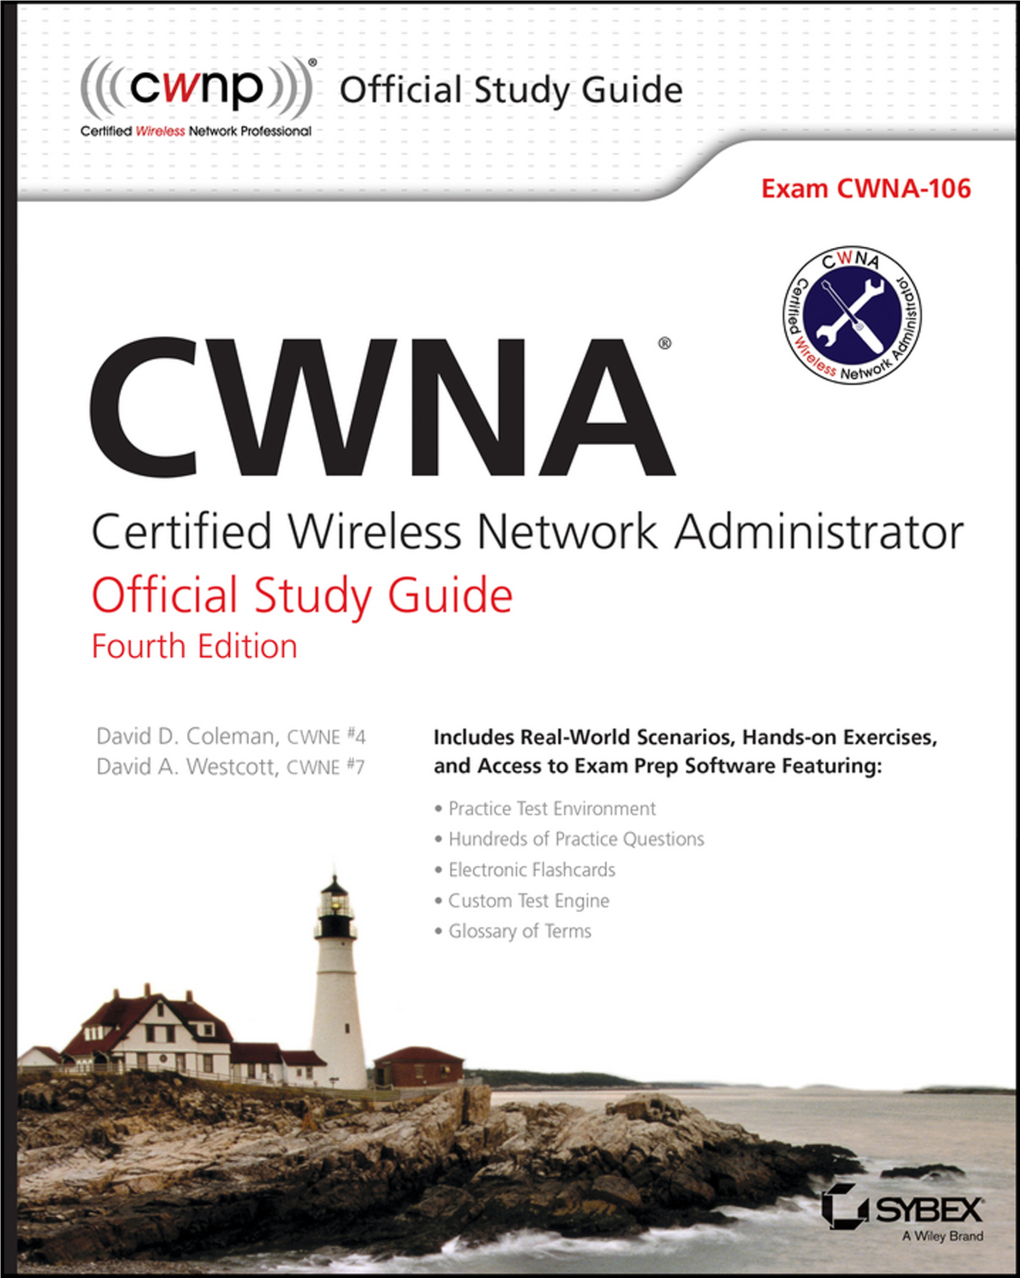 CWNA ® Certified Wireless Network Administrator Official Study Guide Fourth Edition